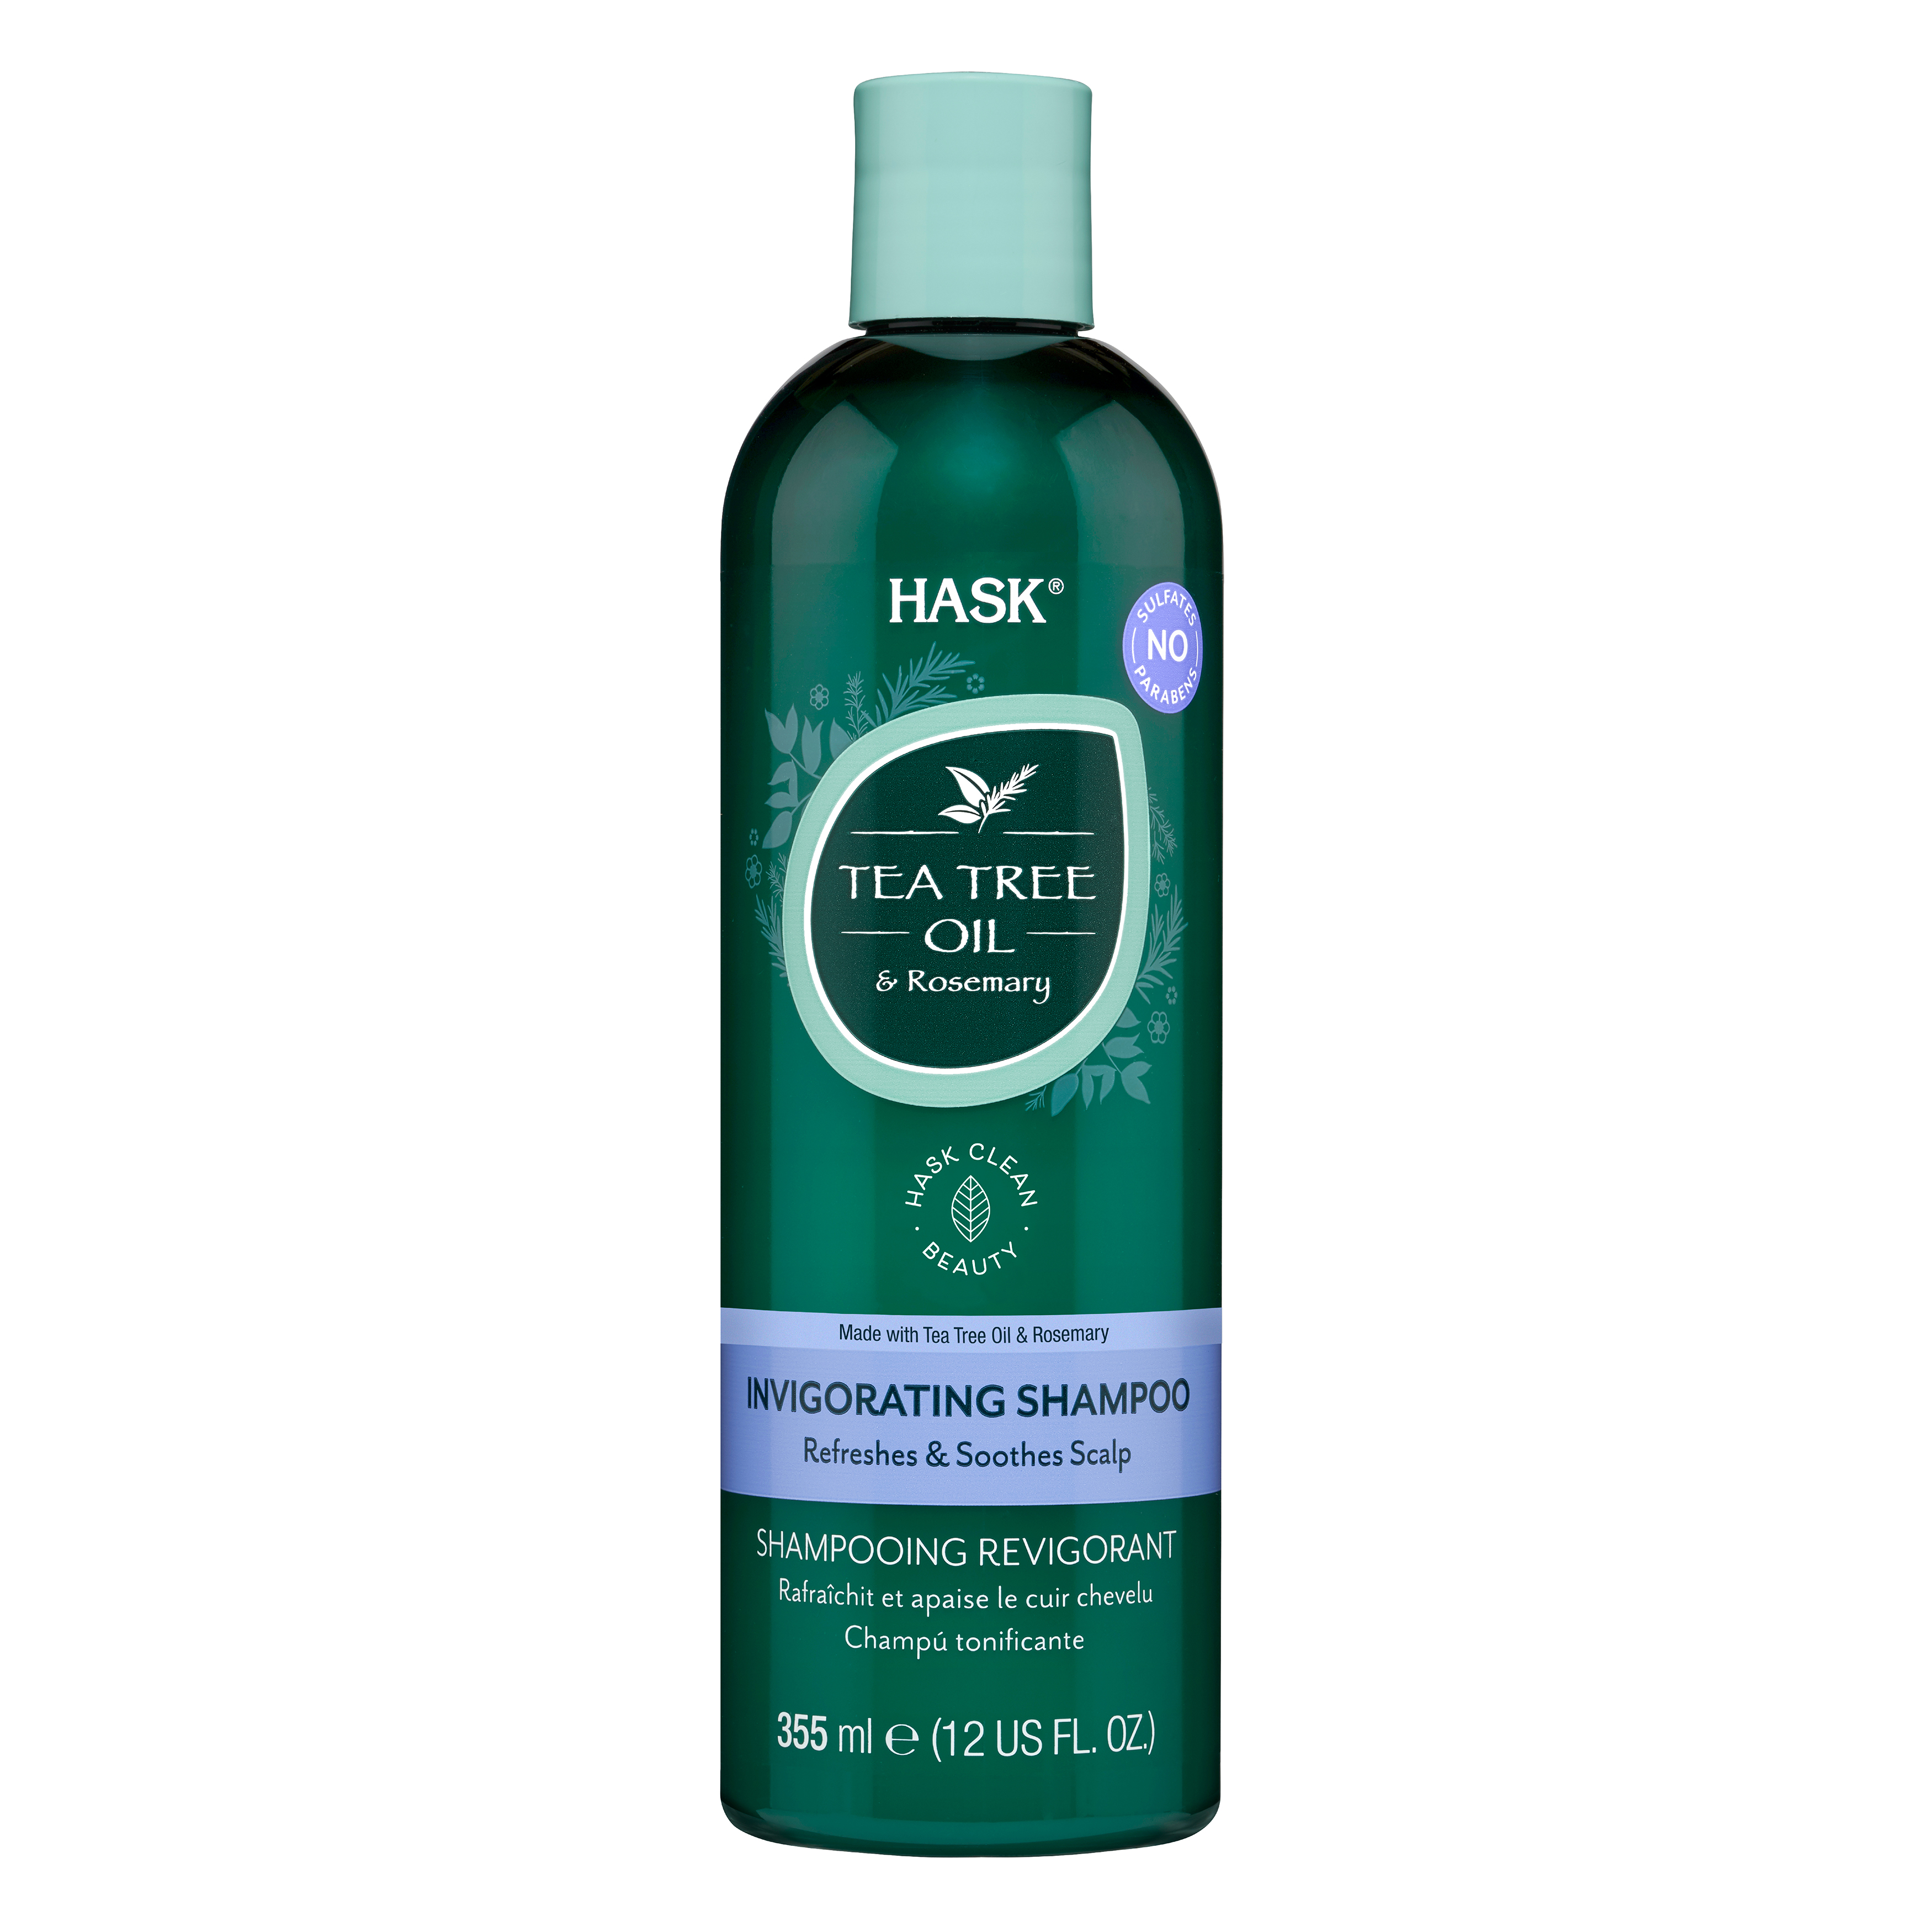 Hask Tea Tree Oil & Rosemary Nourishing Daily Shampoo with Refreshing Herbal Scent, 12 fl oz - image 1 of 14